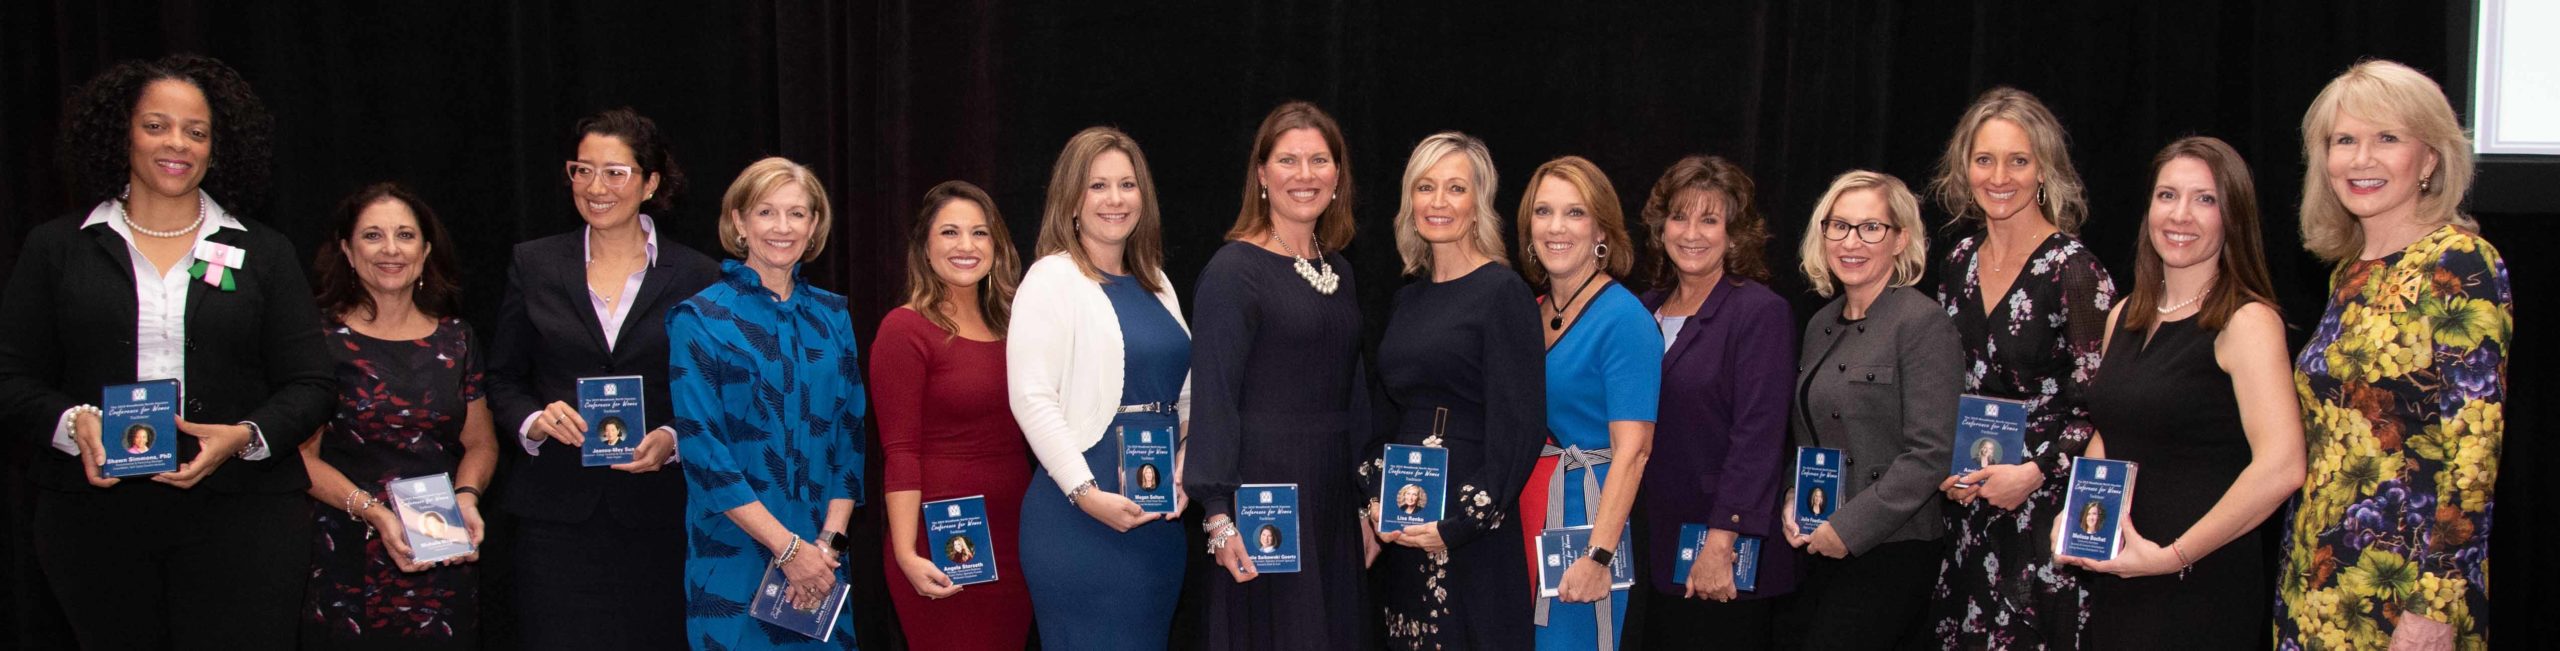 Traiblazer Nominations 2019 Cropped scaled GHWCC | Greater Houston Women's Chamber of Commerce